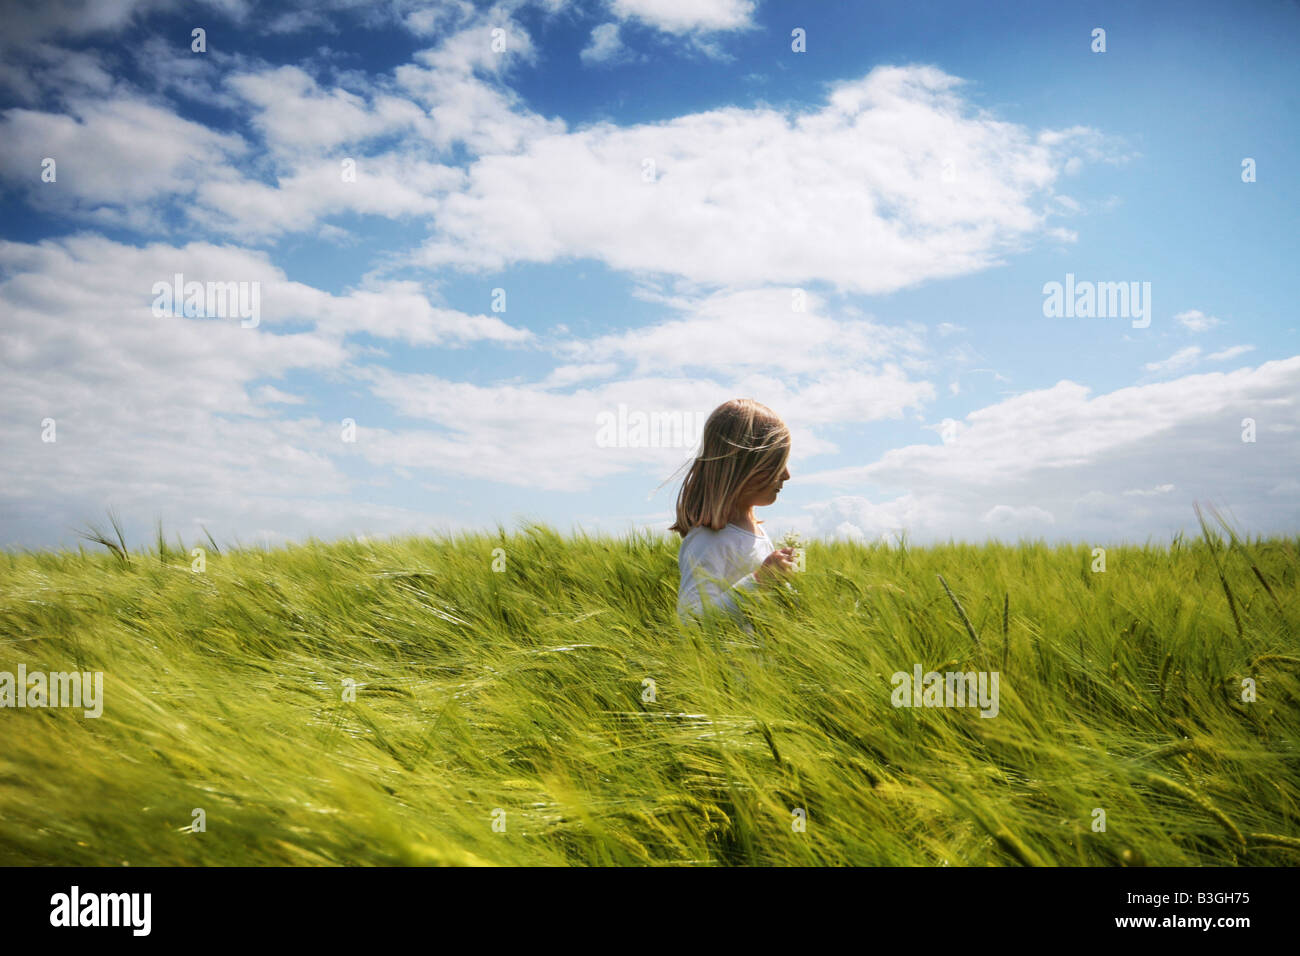 young girl in a barley field Stock Photo